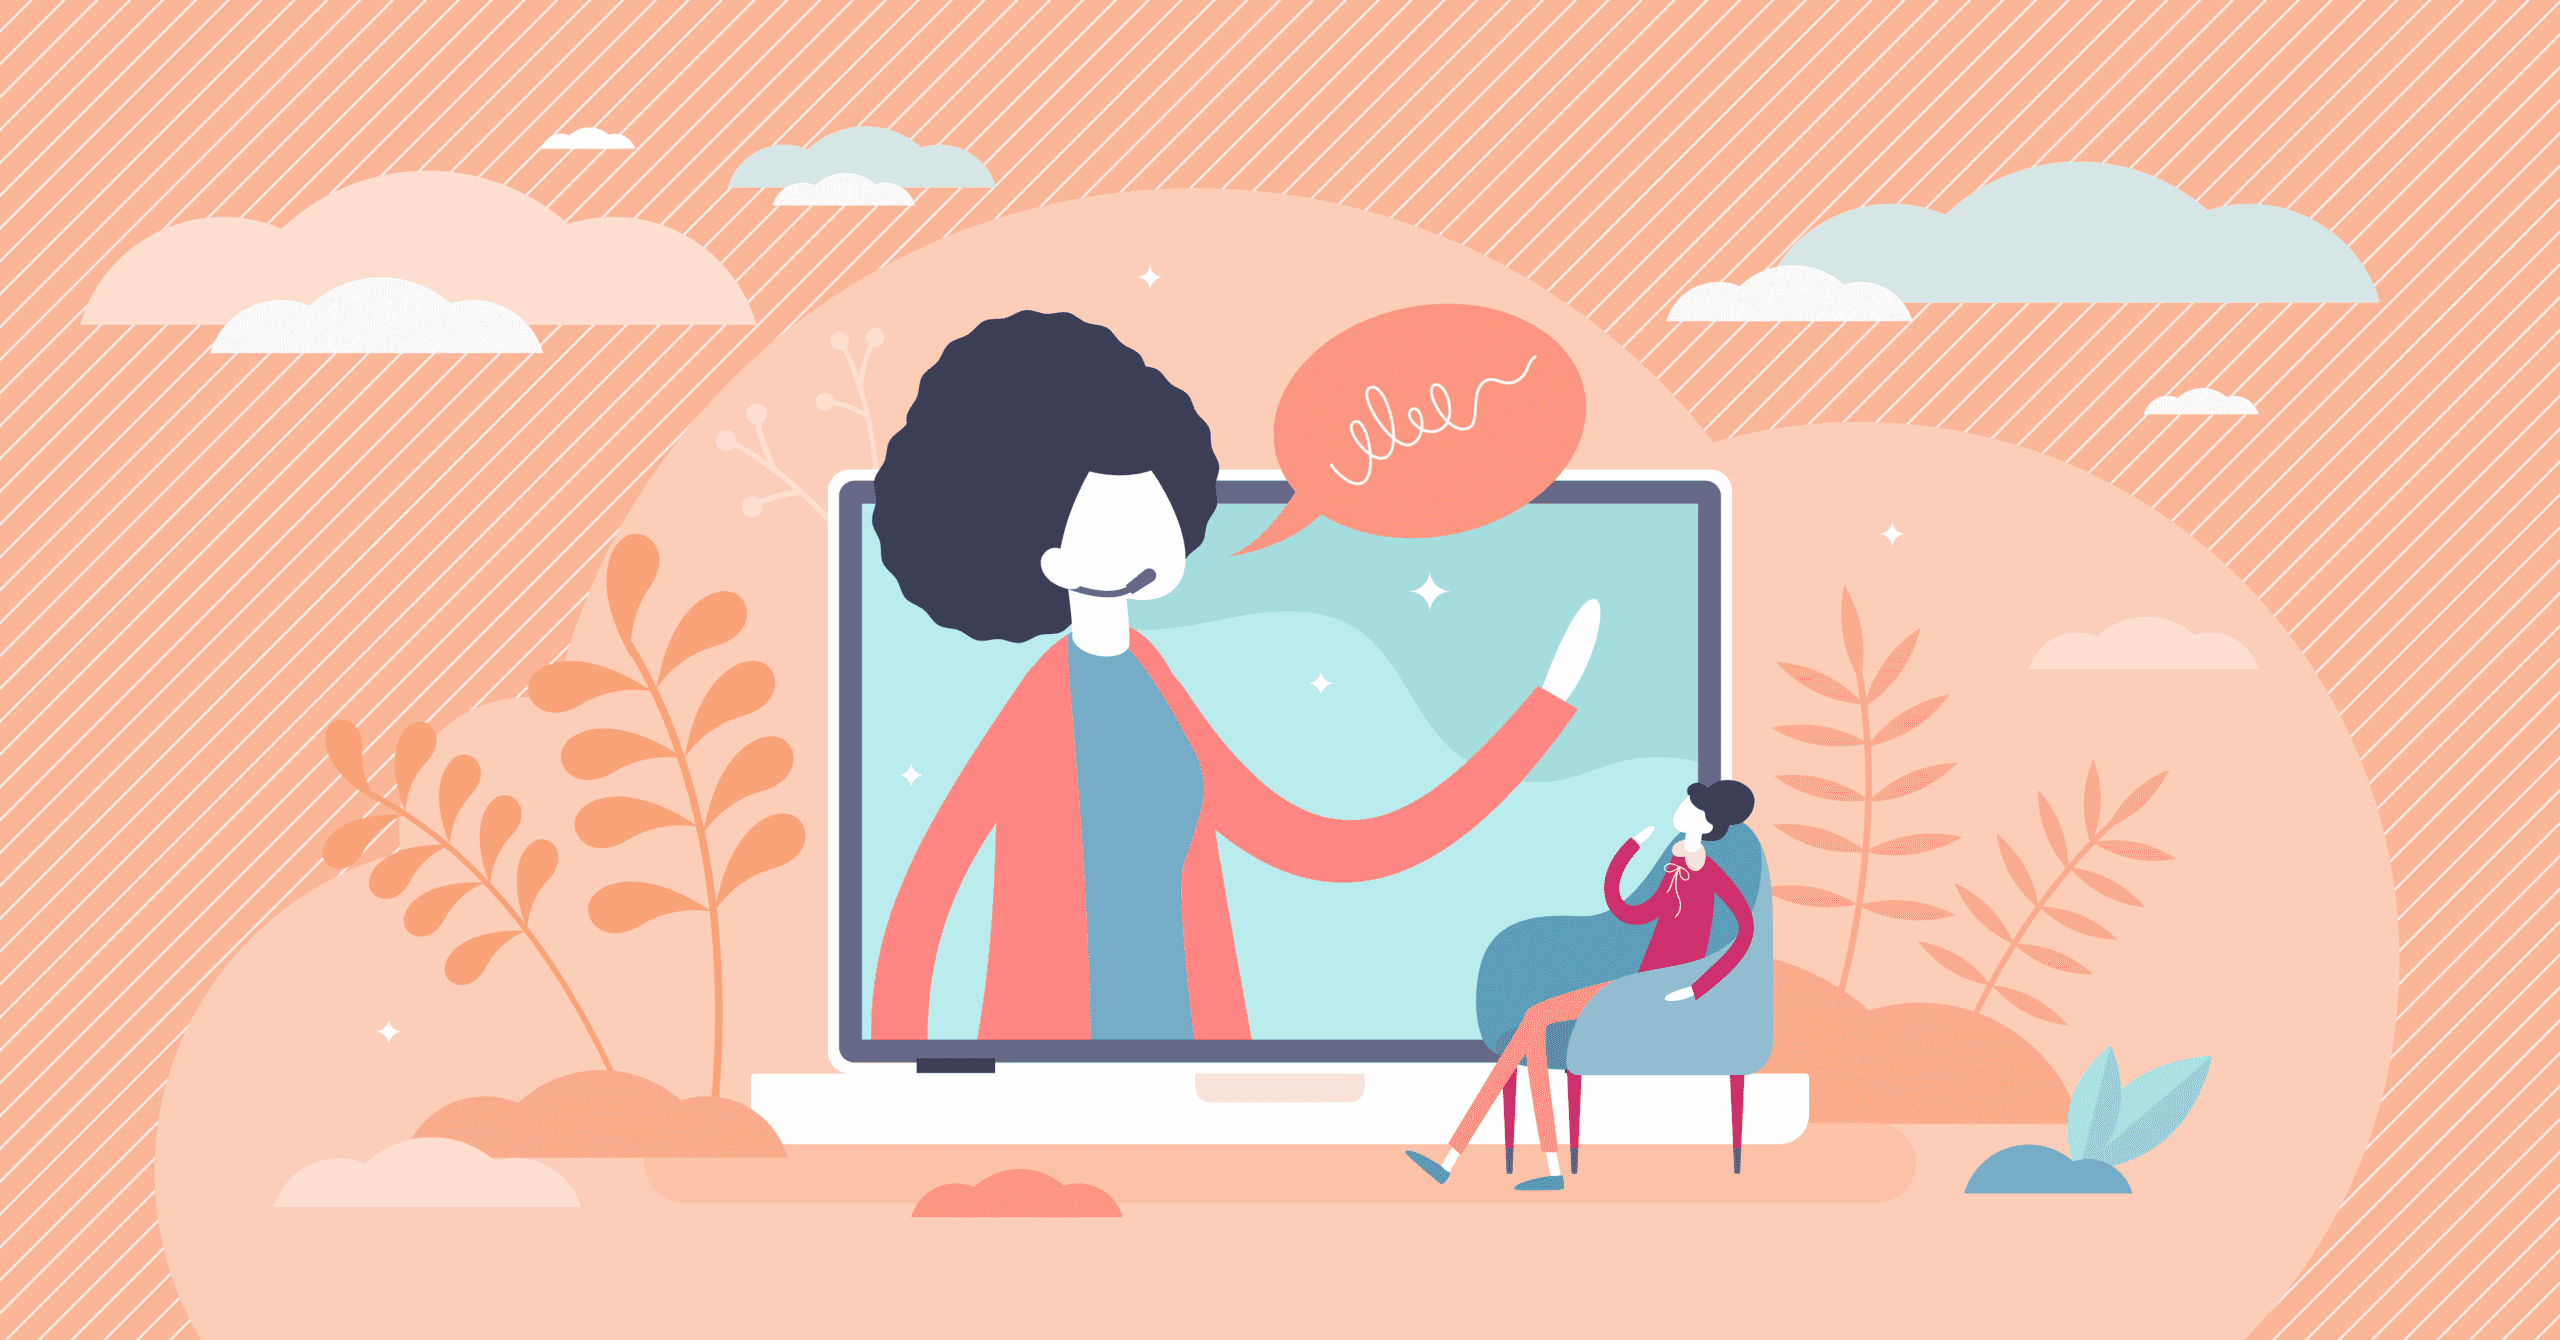 Illustration of a woman speaking on a laptop screen and a woman sitting on a couch listening